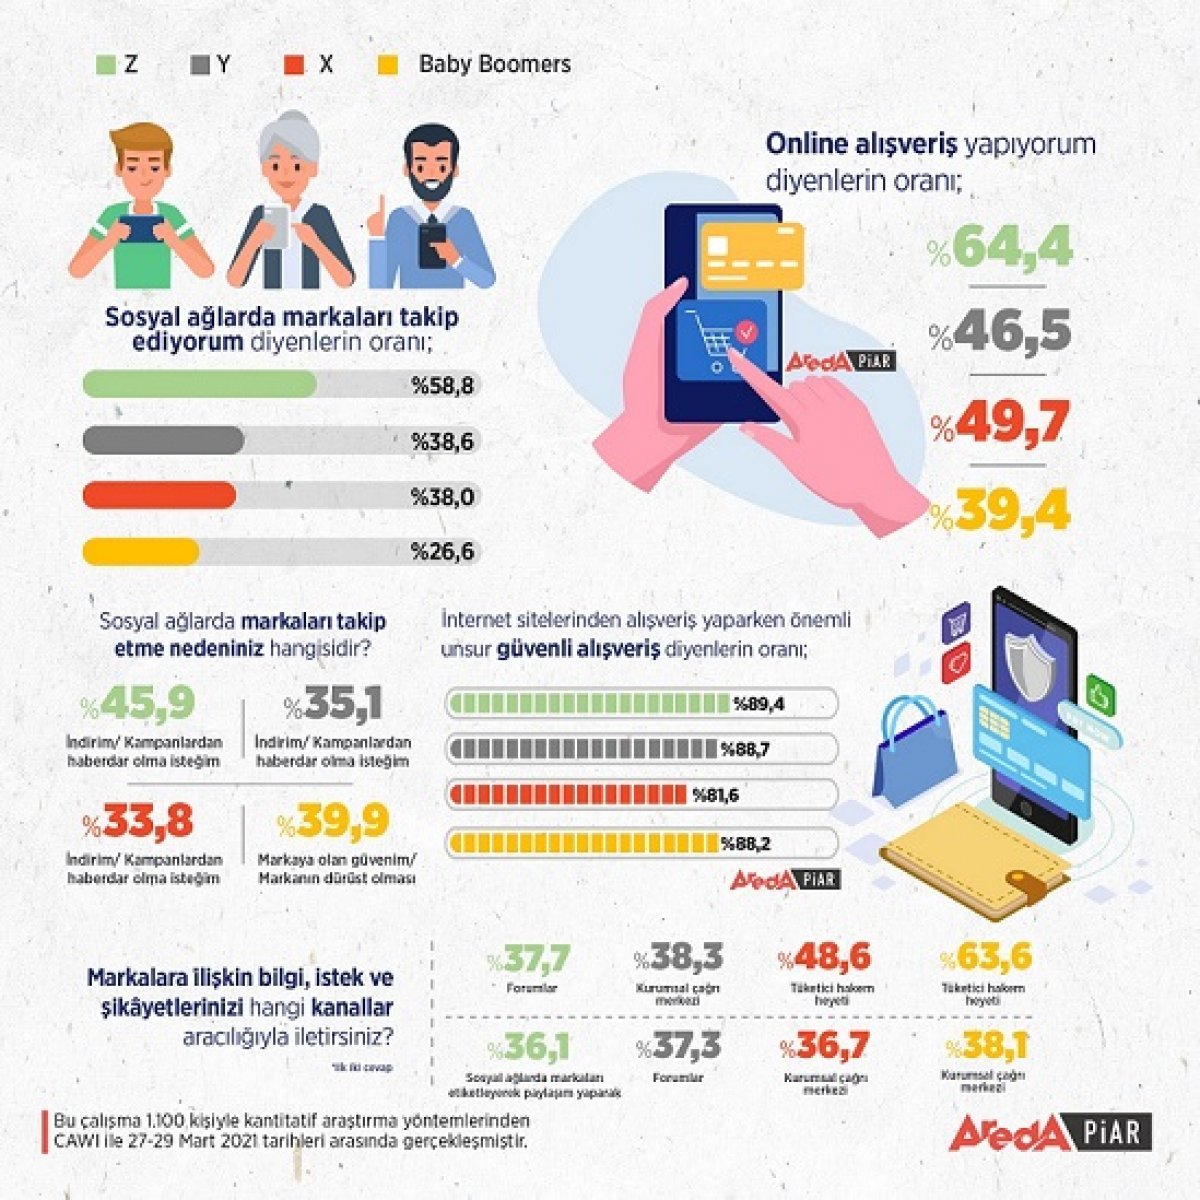 People over the age of 65 in Turkey mostly prefer Facebook #3